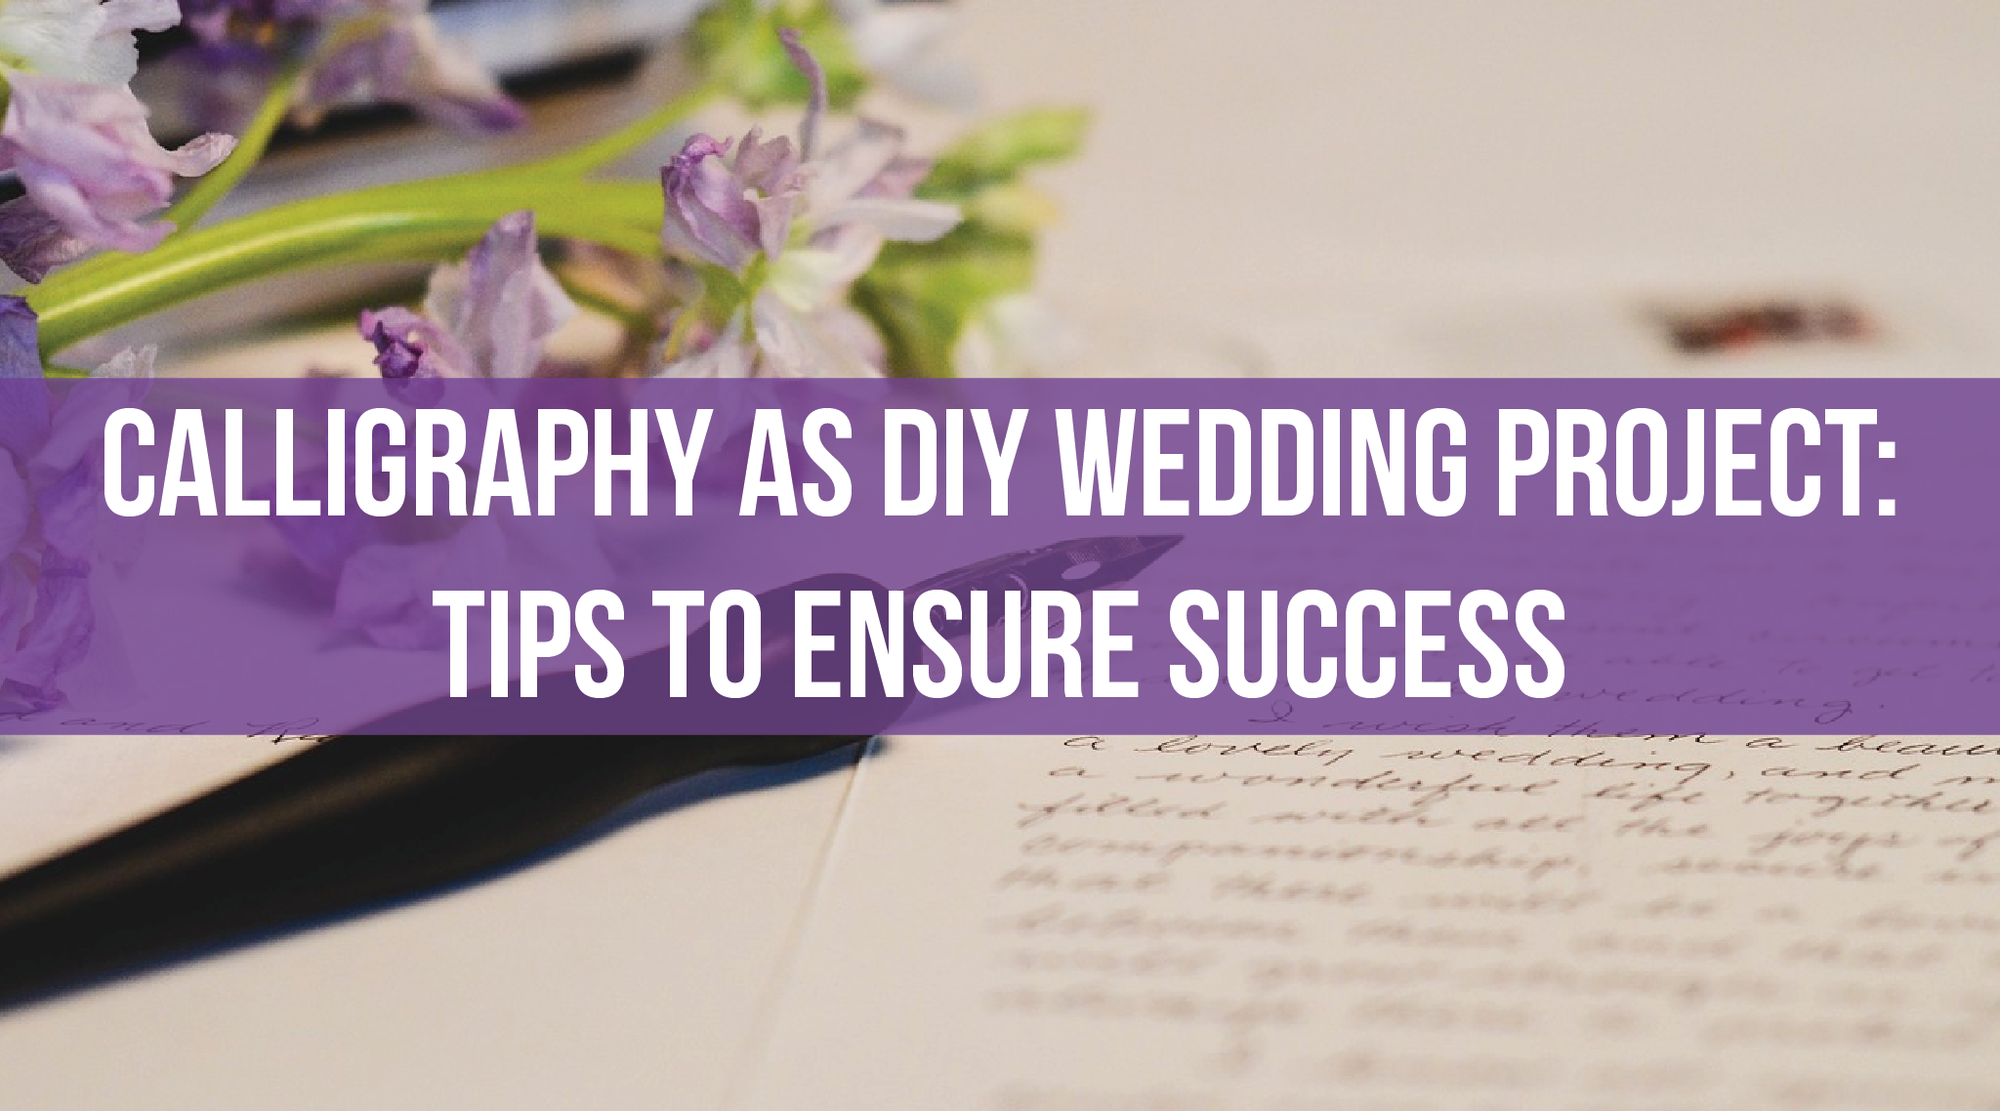 Calligraphy as DIY Wedding Project: Tips to Ensure Success